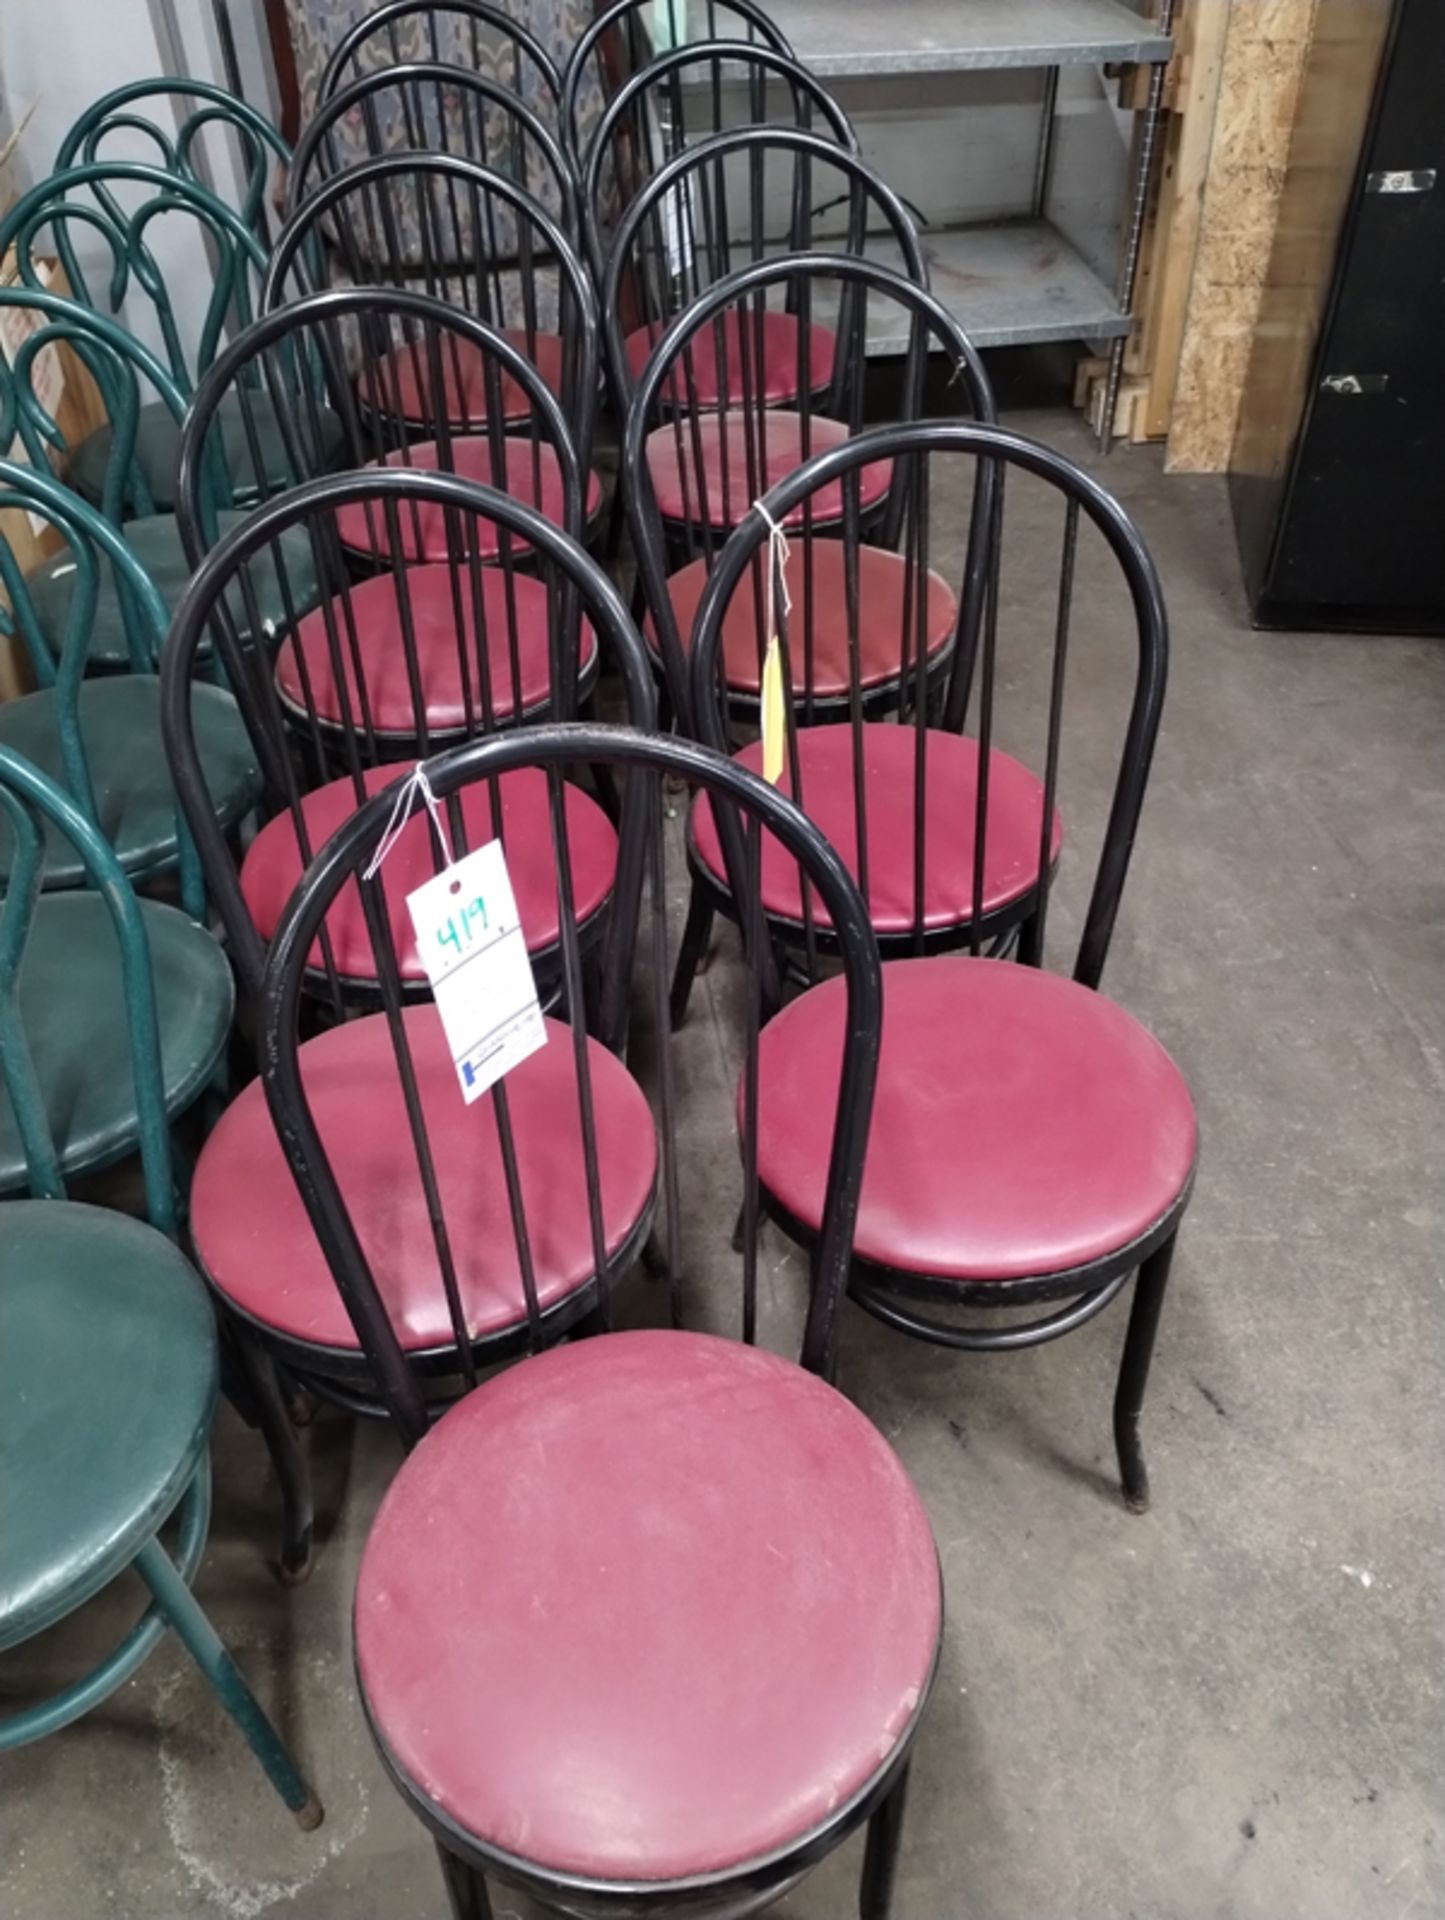 11 RESTAURANT CHAIRS - BLACK AND RED WITH METAL FRAME